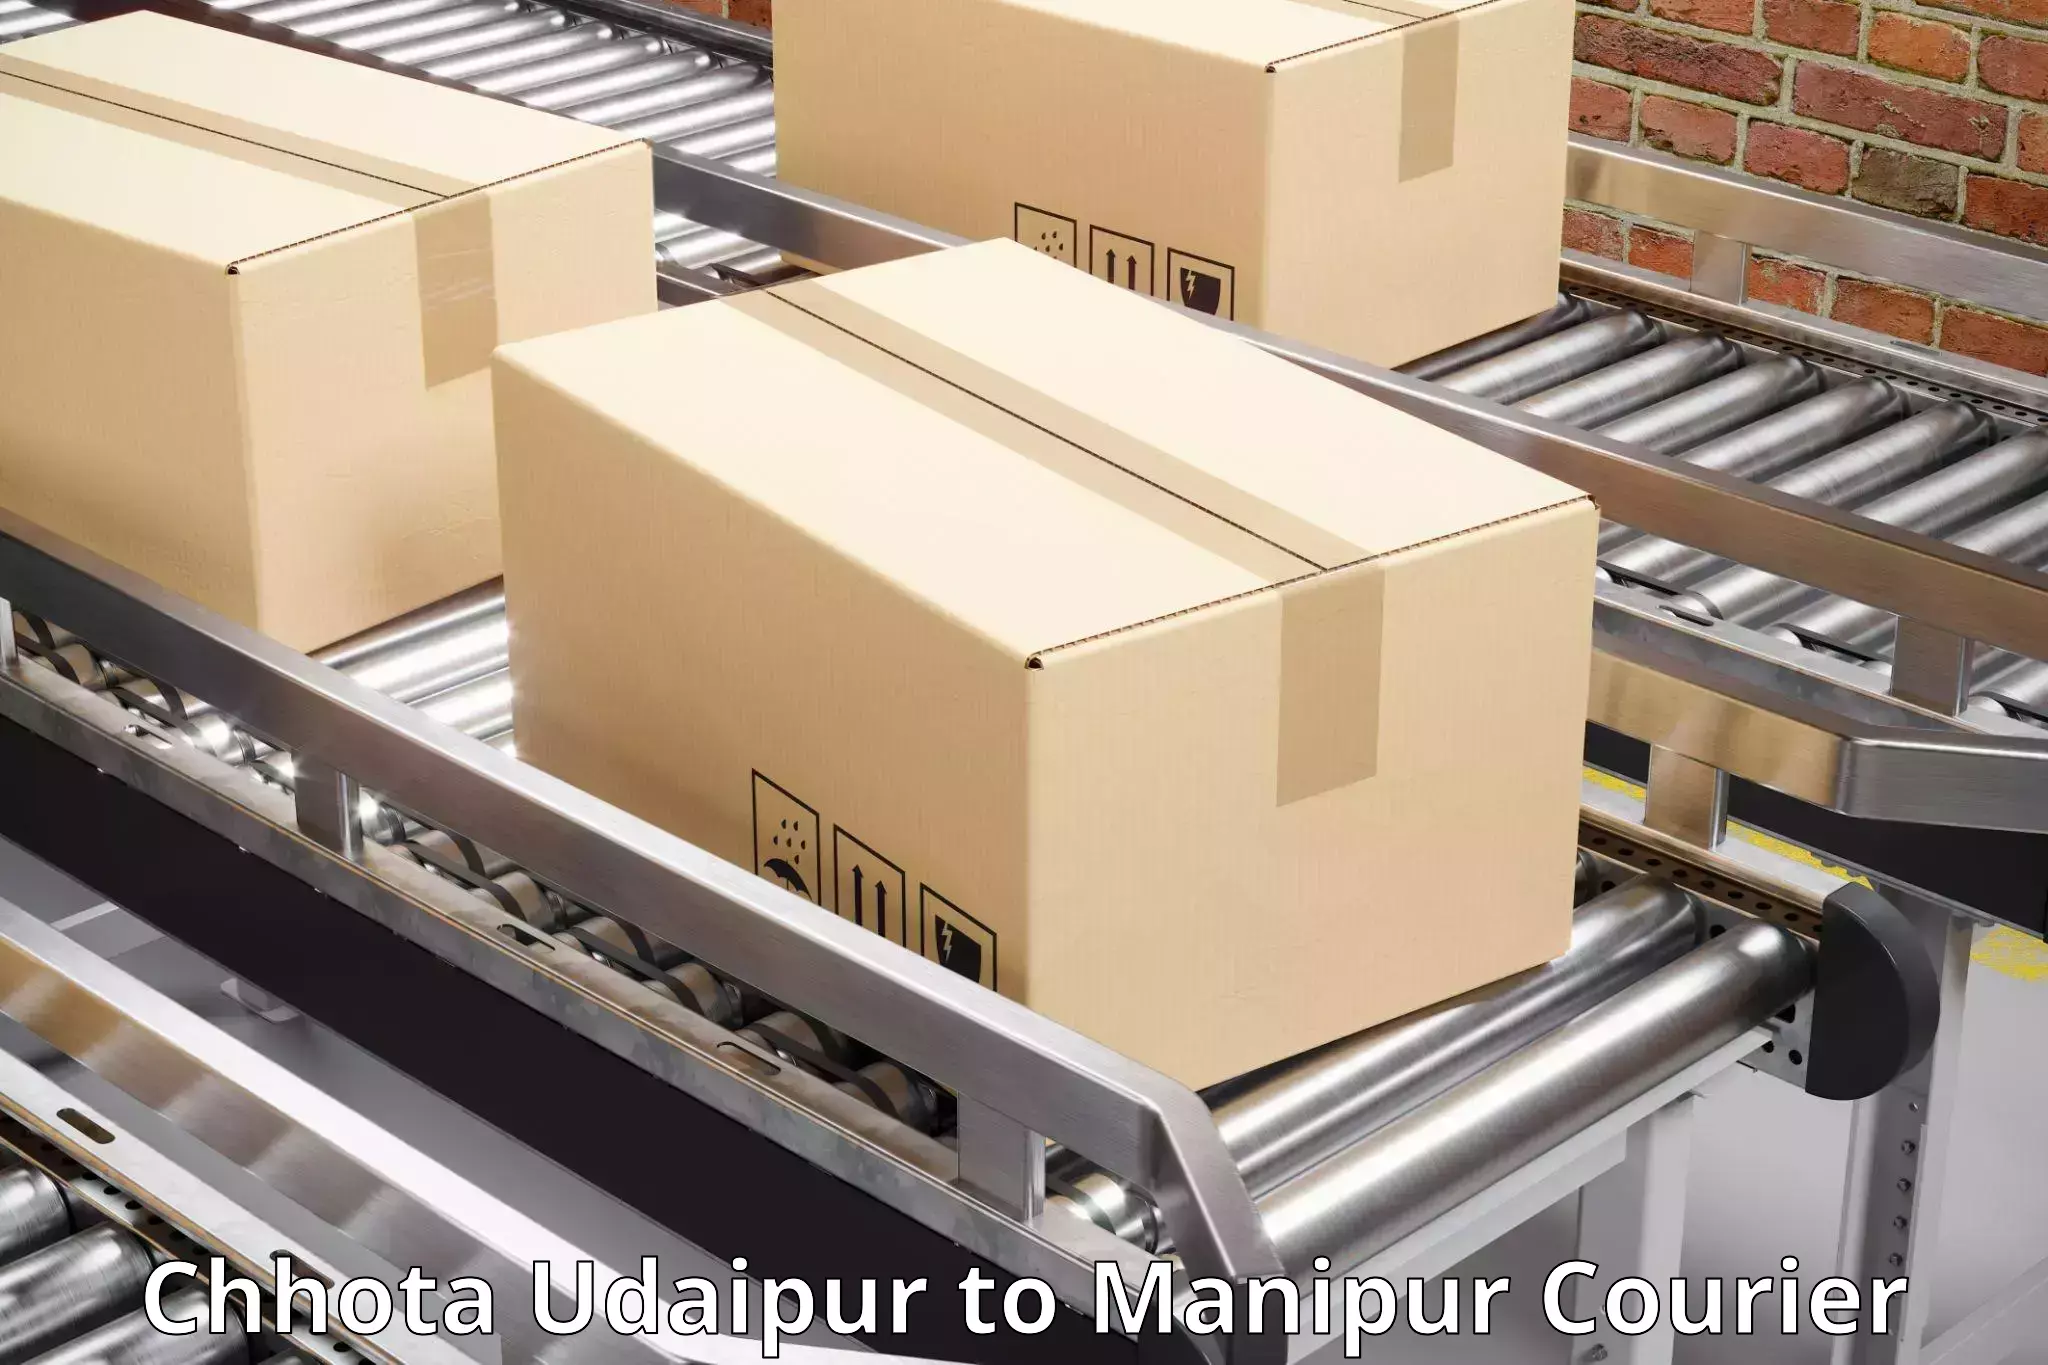 Weekend courier service Chhota Udaipur to Chandel